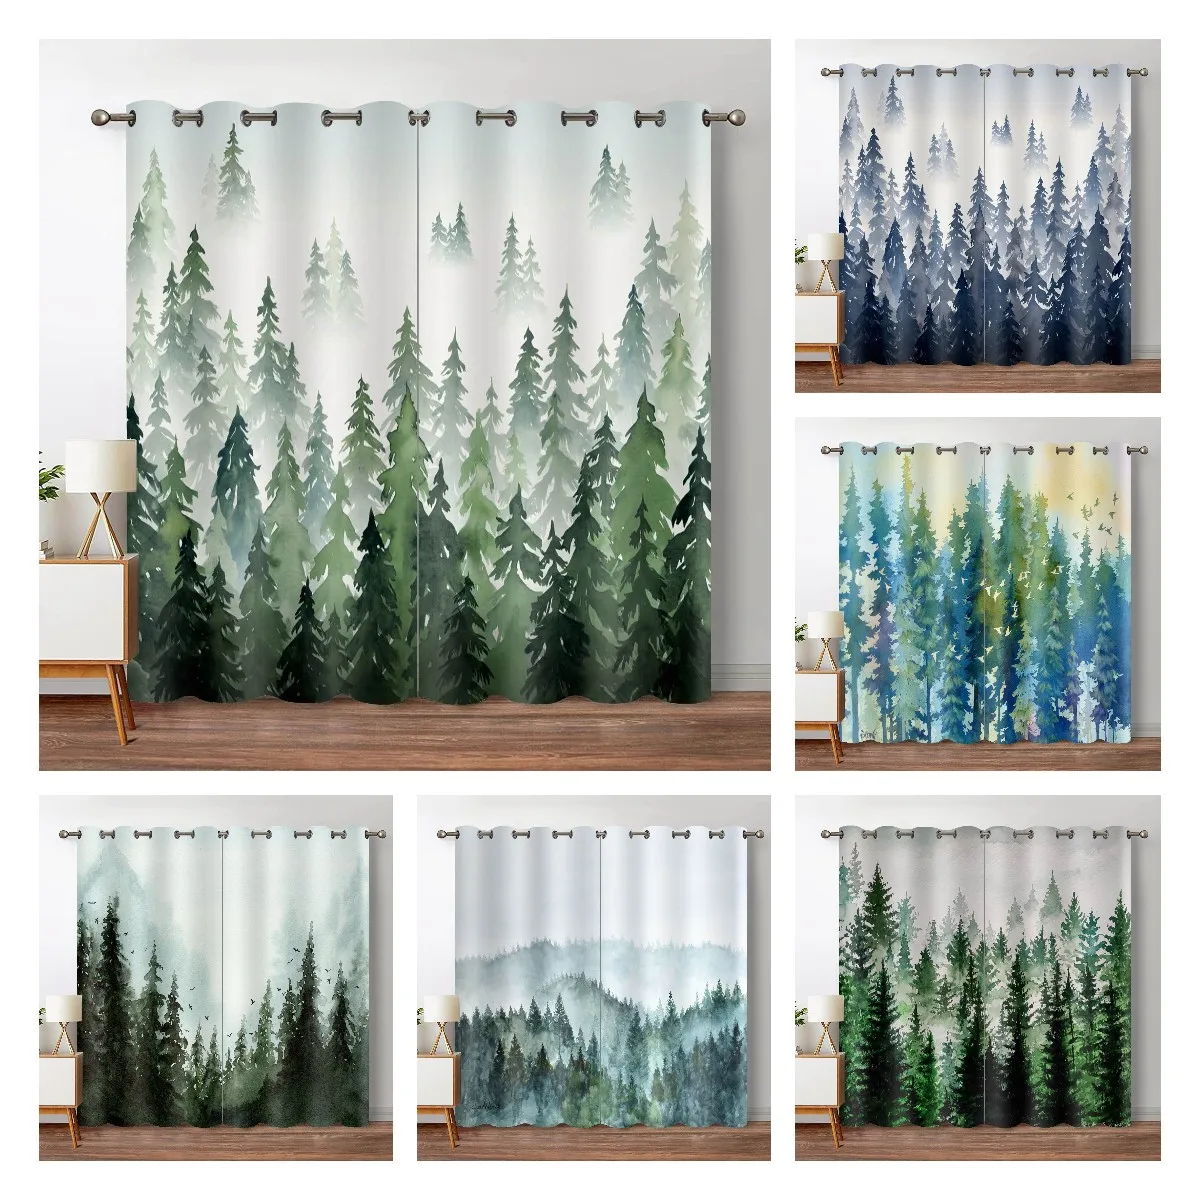 

Green Forest Window Curtains Watercolor Tree Silhouette Nature Landscape Printed Blackout Curtain for The Bedroom Living Room